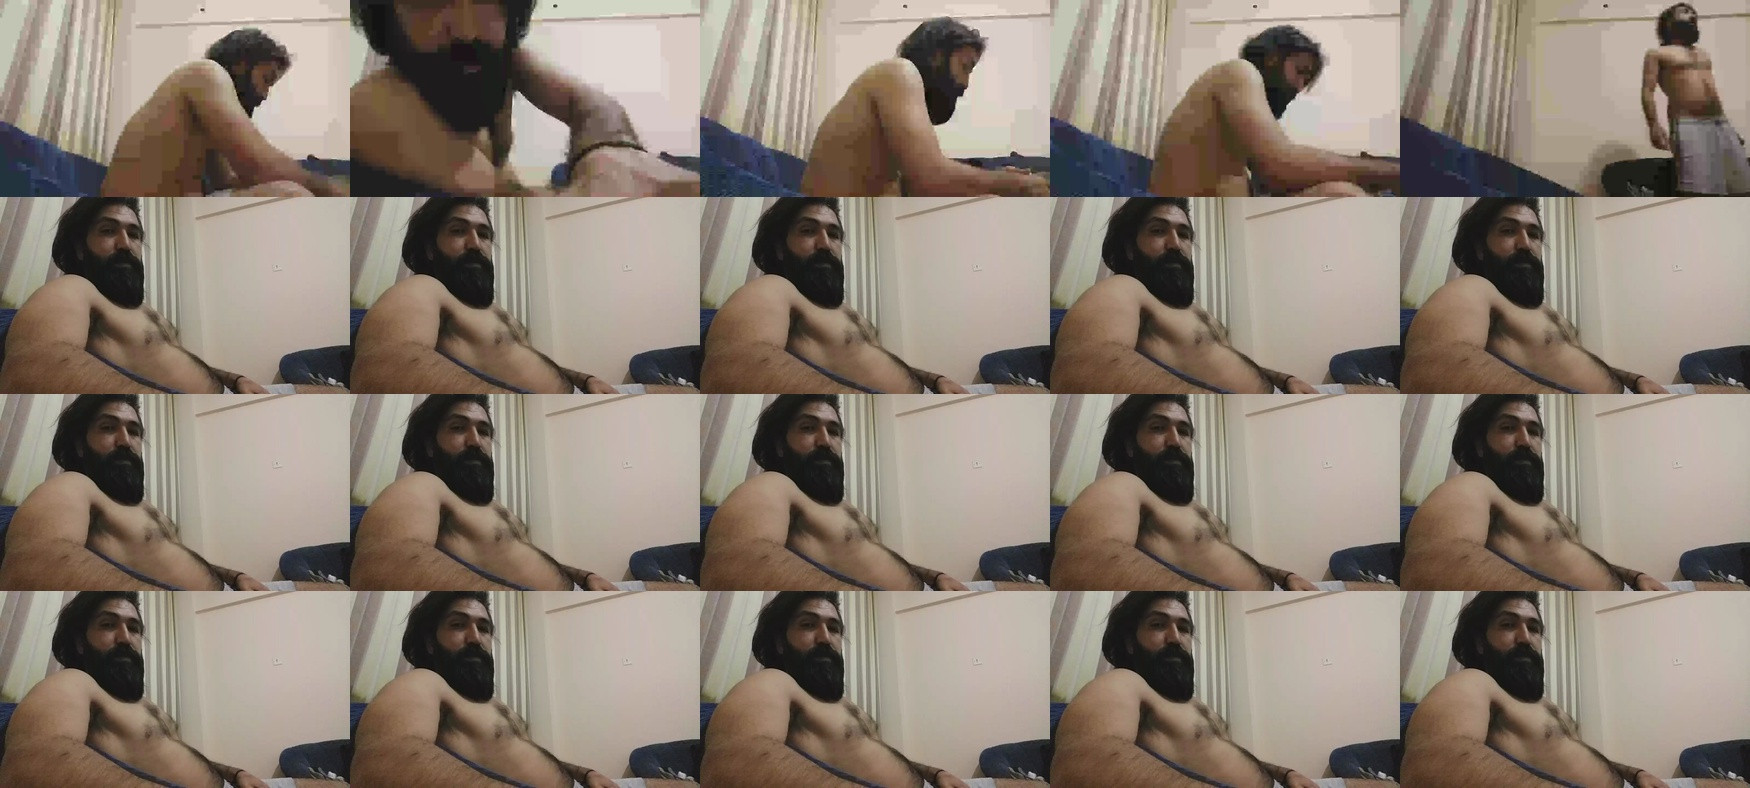 billy1727  02-05-2021 Recorded Video Topless